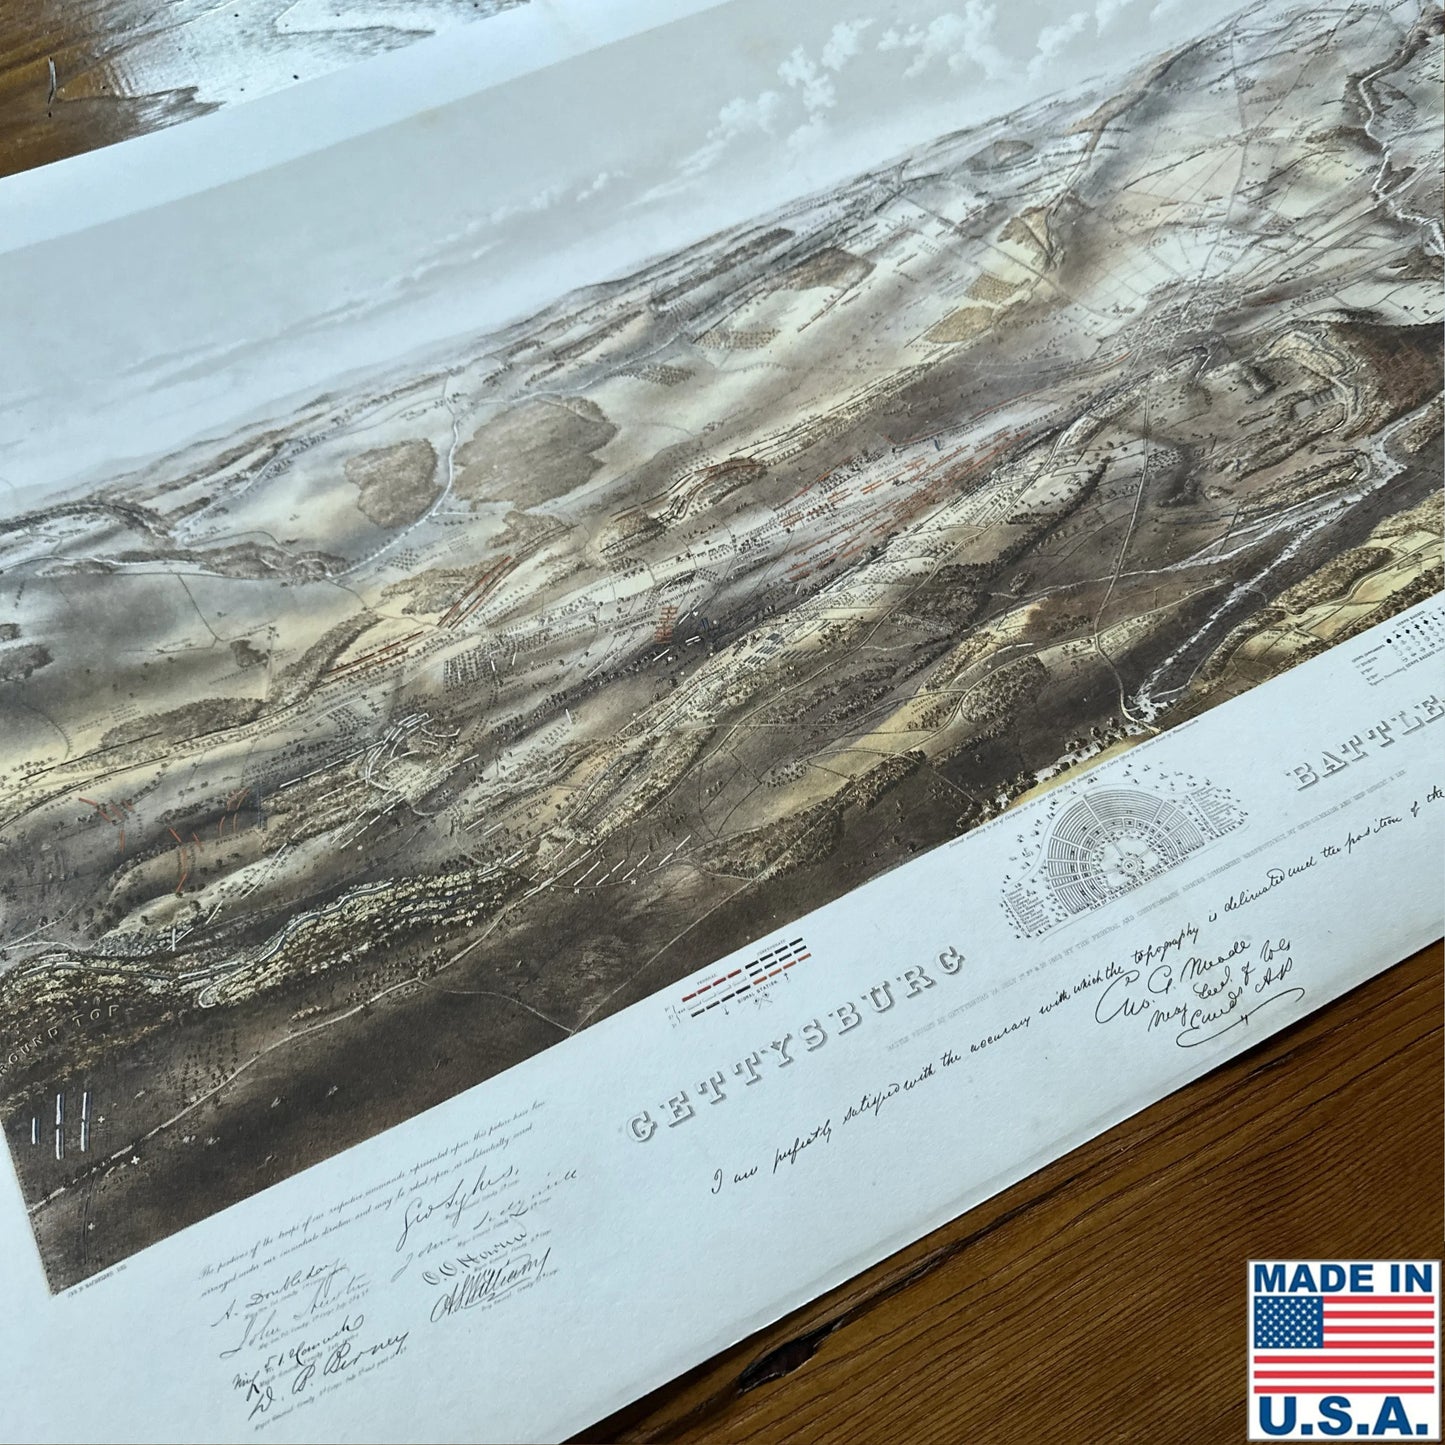 Famous Gettysburg print, 24" x 36" reproduced in archival quality